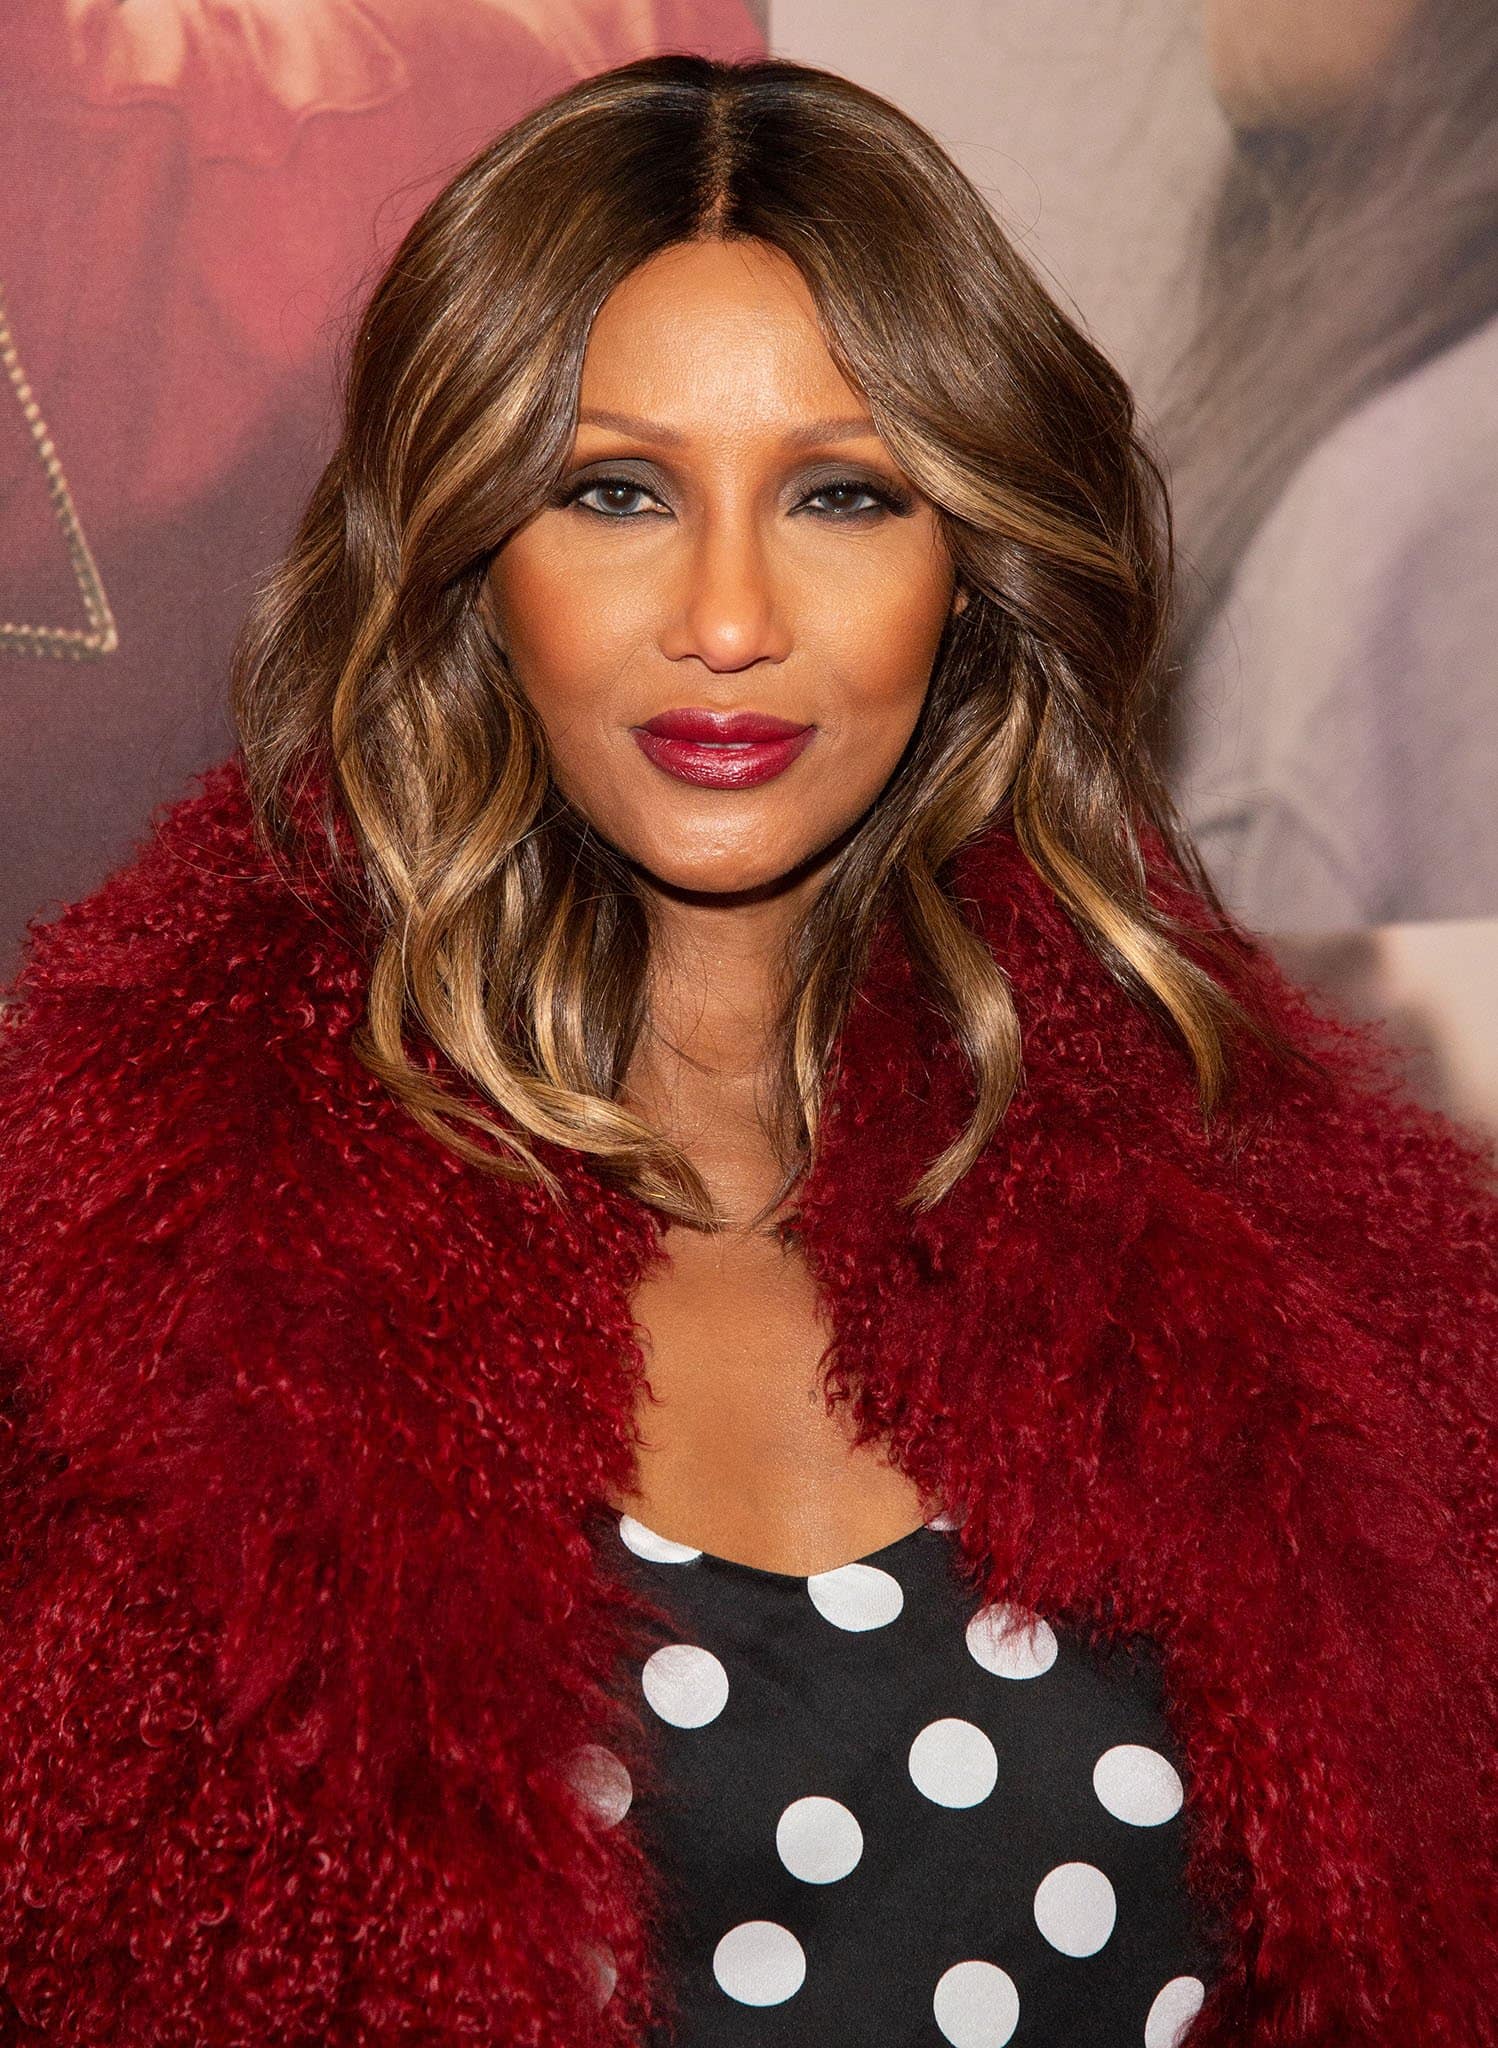 Iman is an entrepreneur, actress, and high-end model who has worked with a number of top designers and photographers